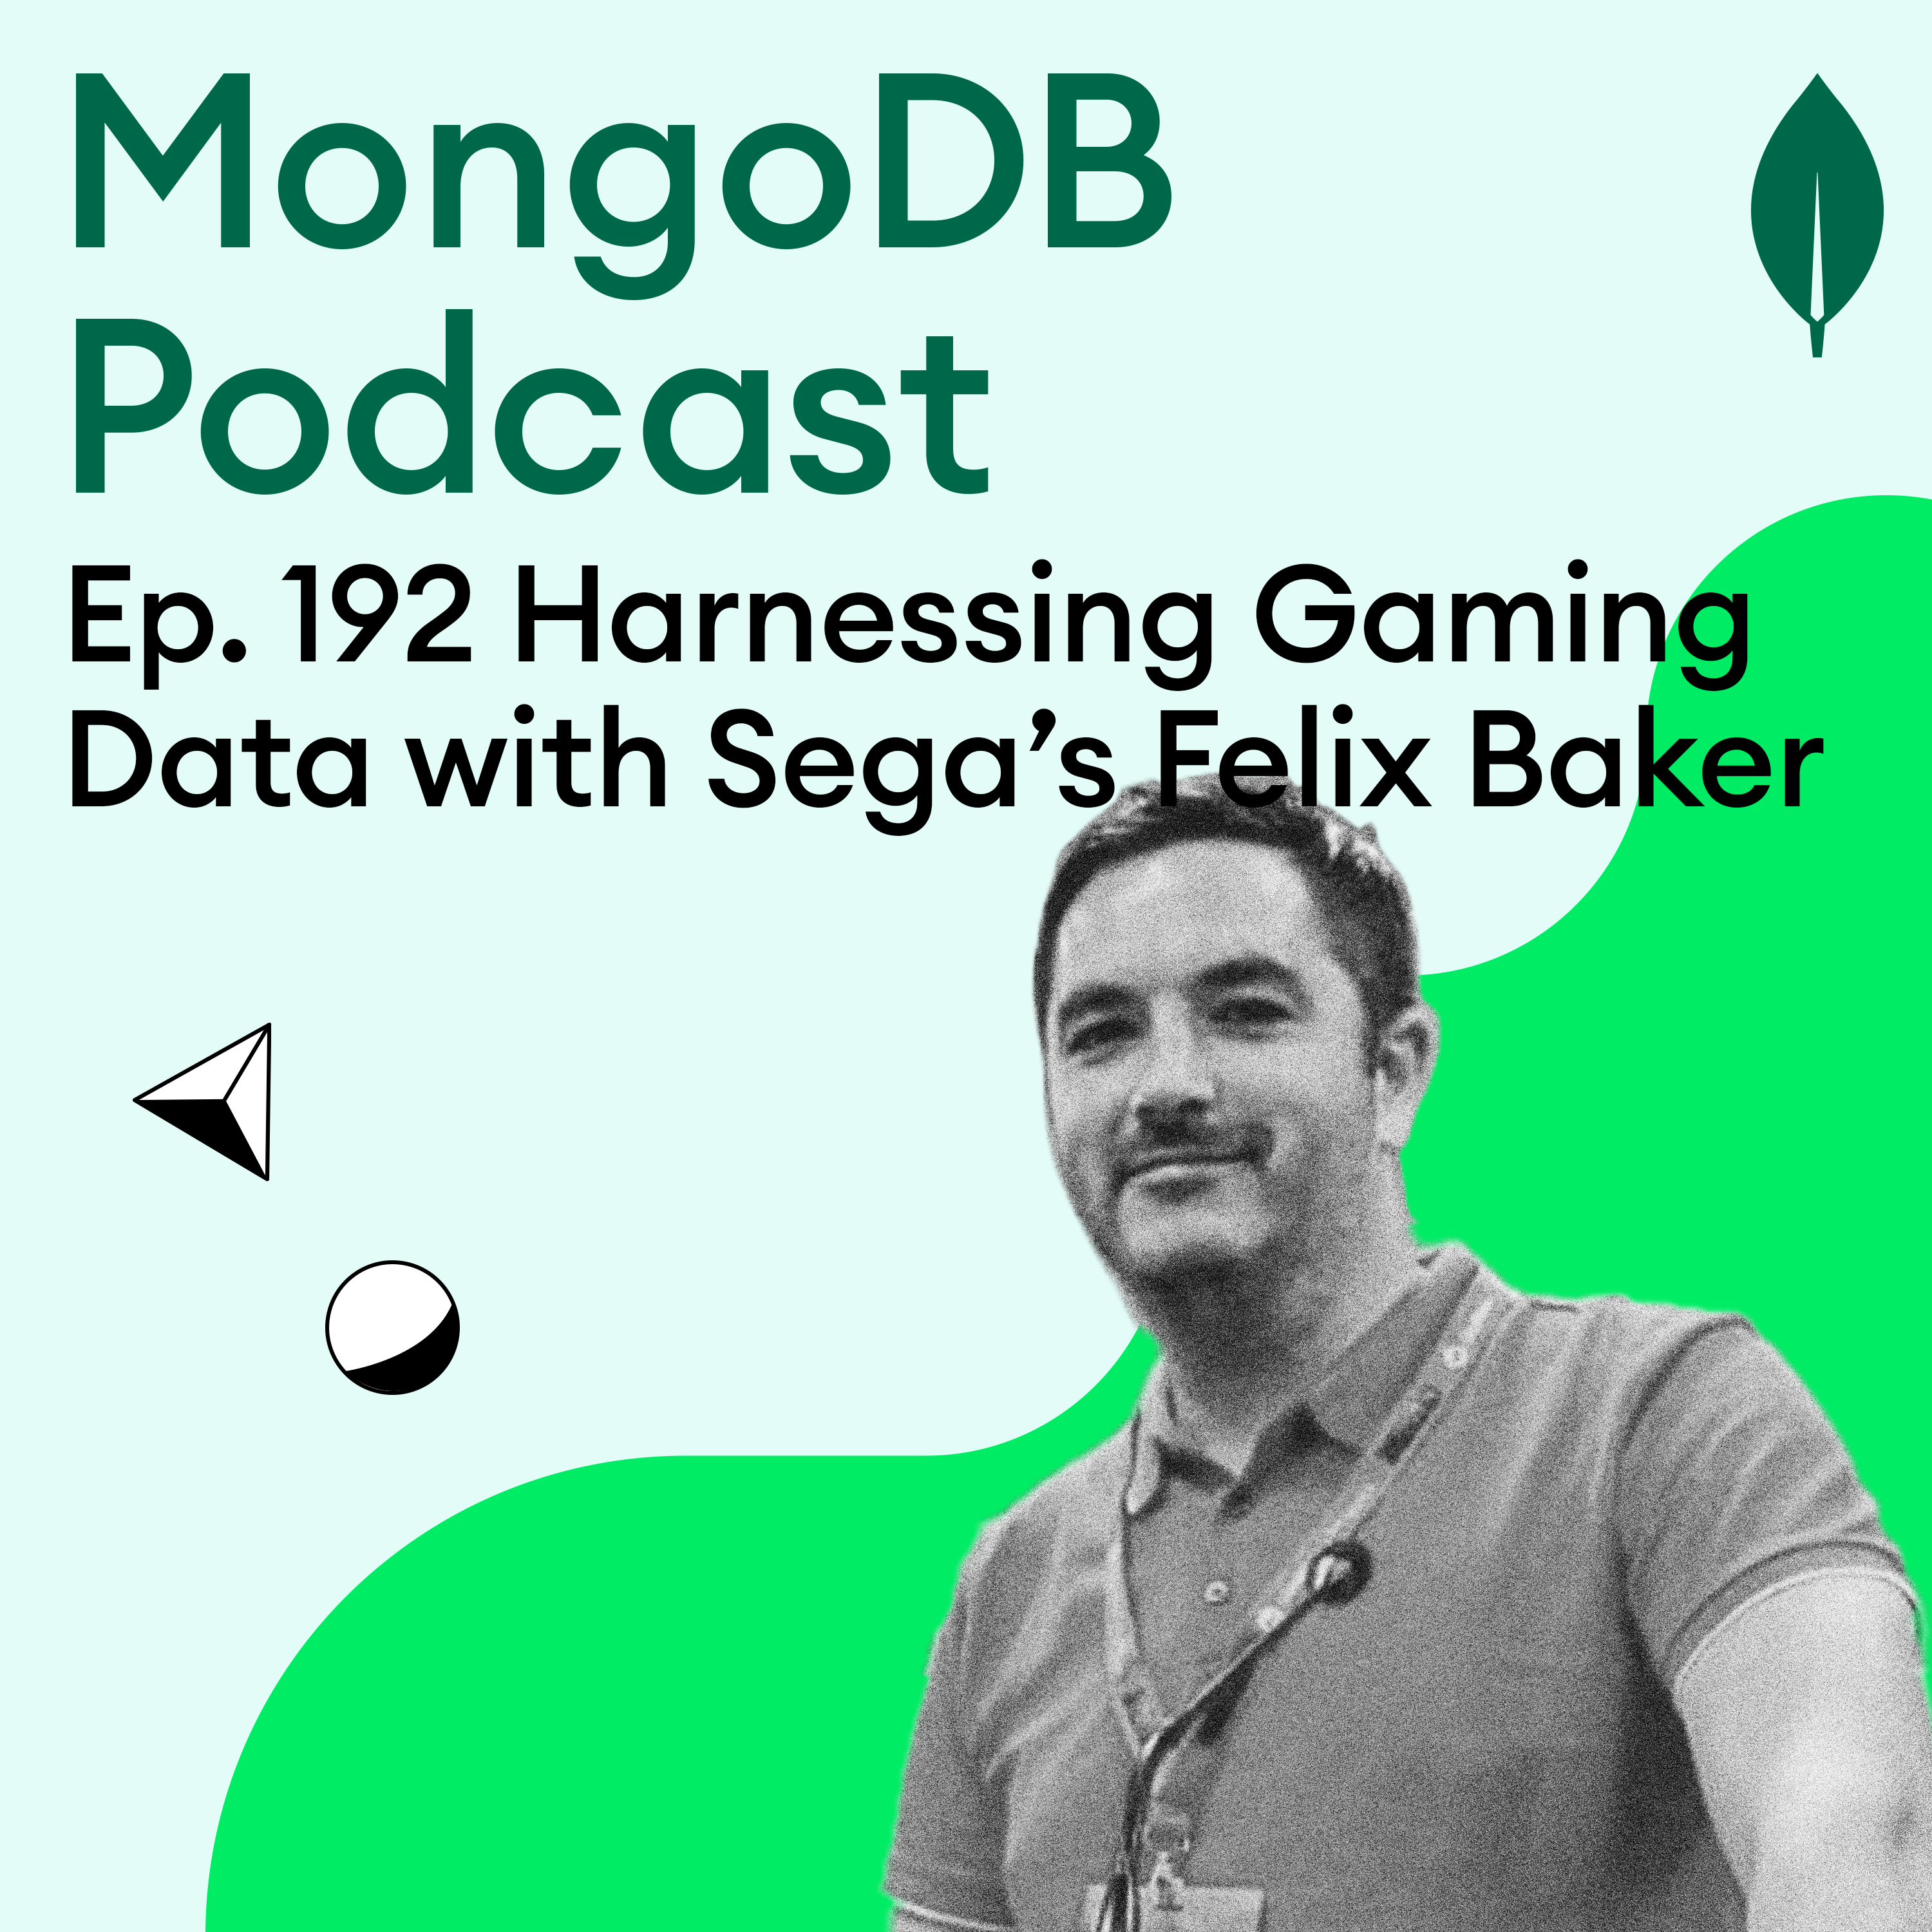 Ep. 192 Harnessing the Power of Gaming Data with Sega's Felix Baker